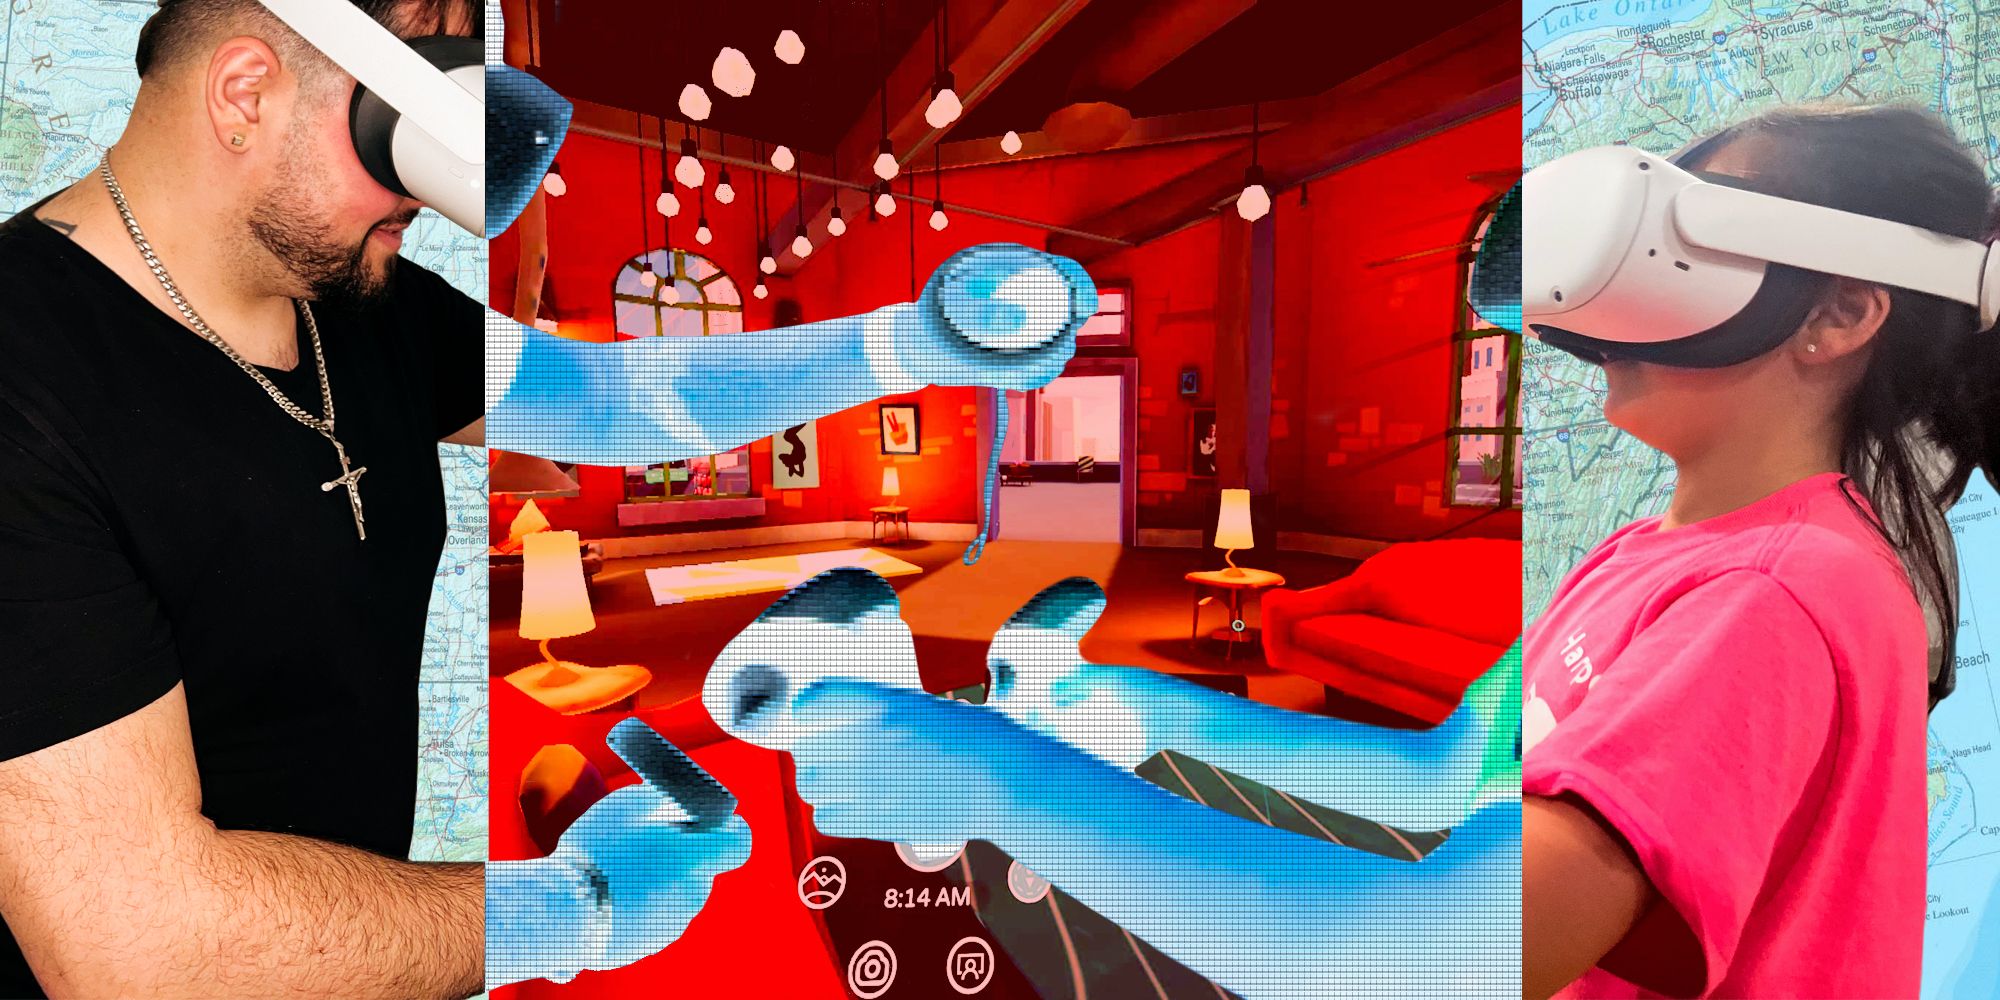 Virtual realities: How cities are moving into the metaverse and